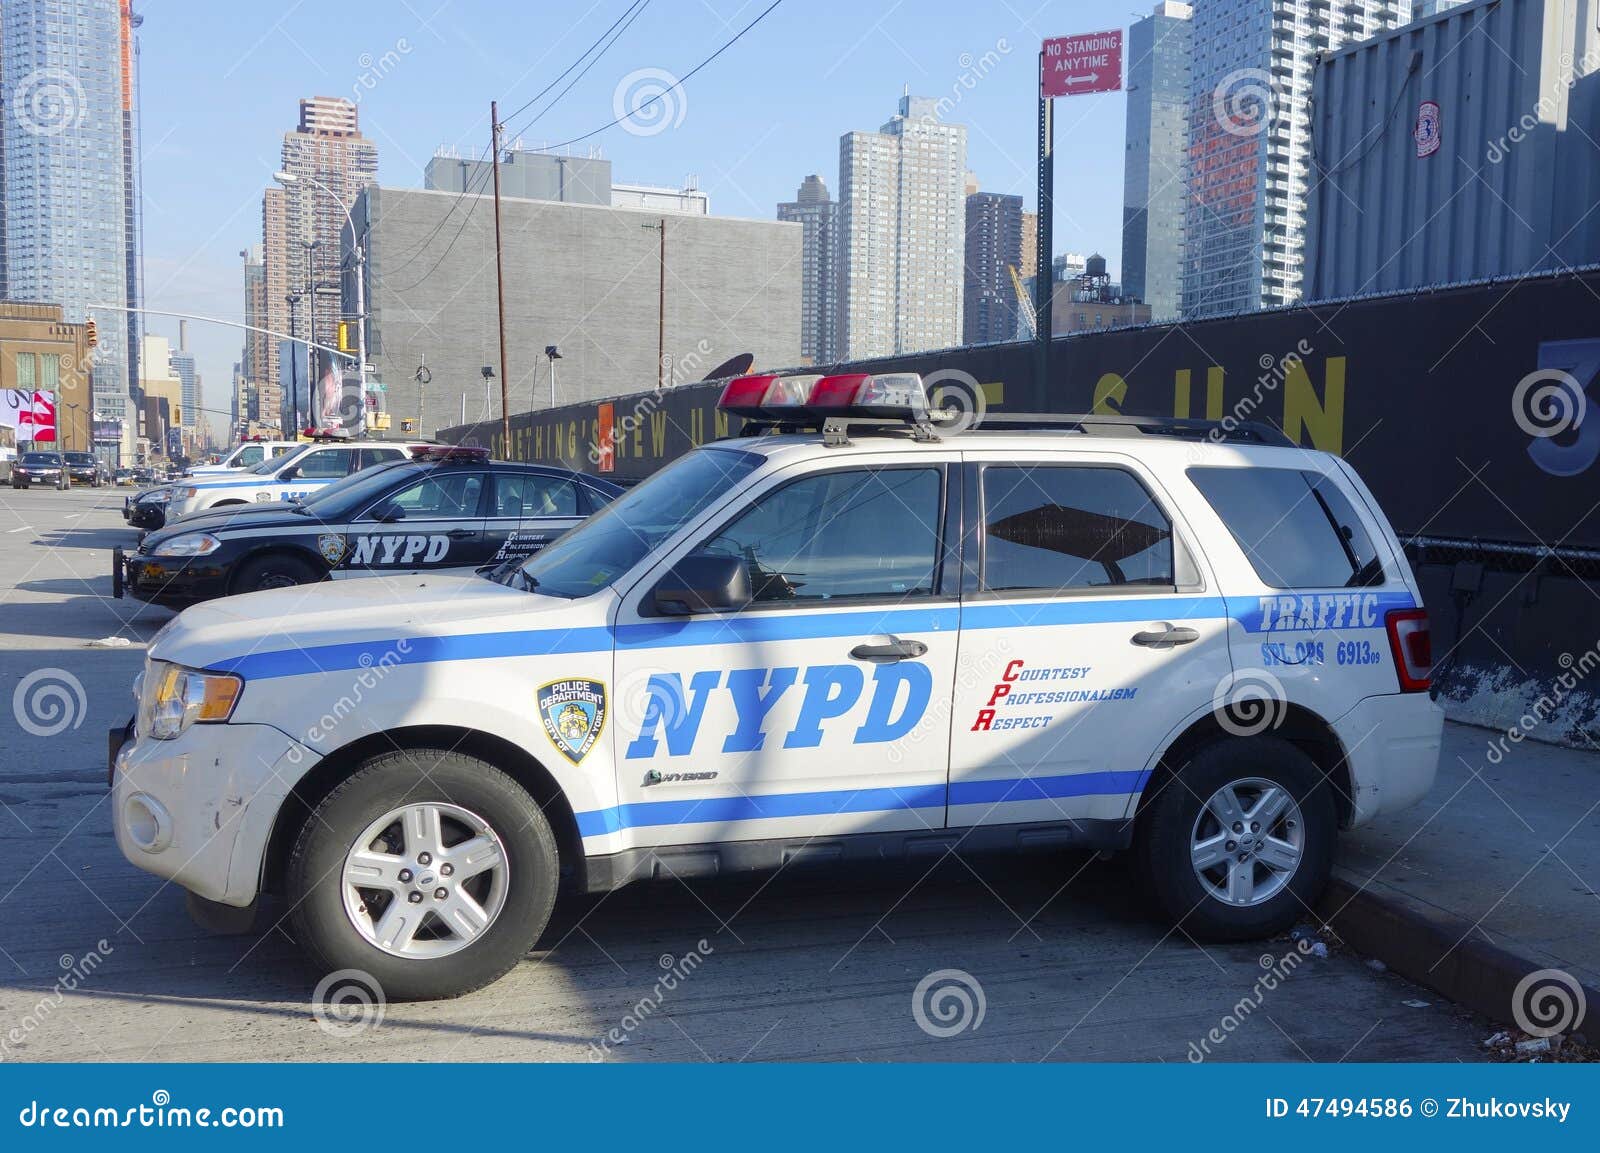 NYPD Traffic Control Vehicle In Manhattan Editorial Photo - Image: 47494586